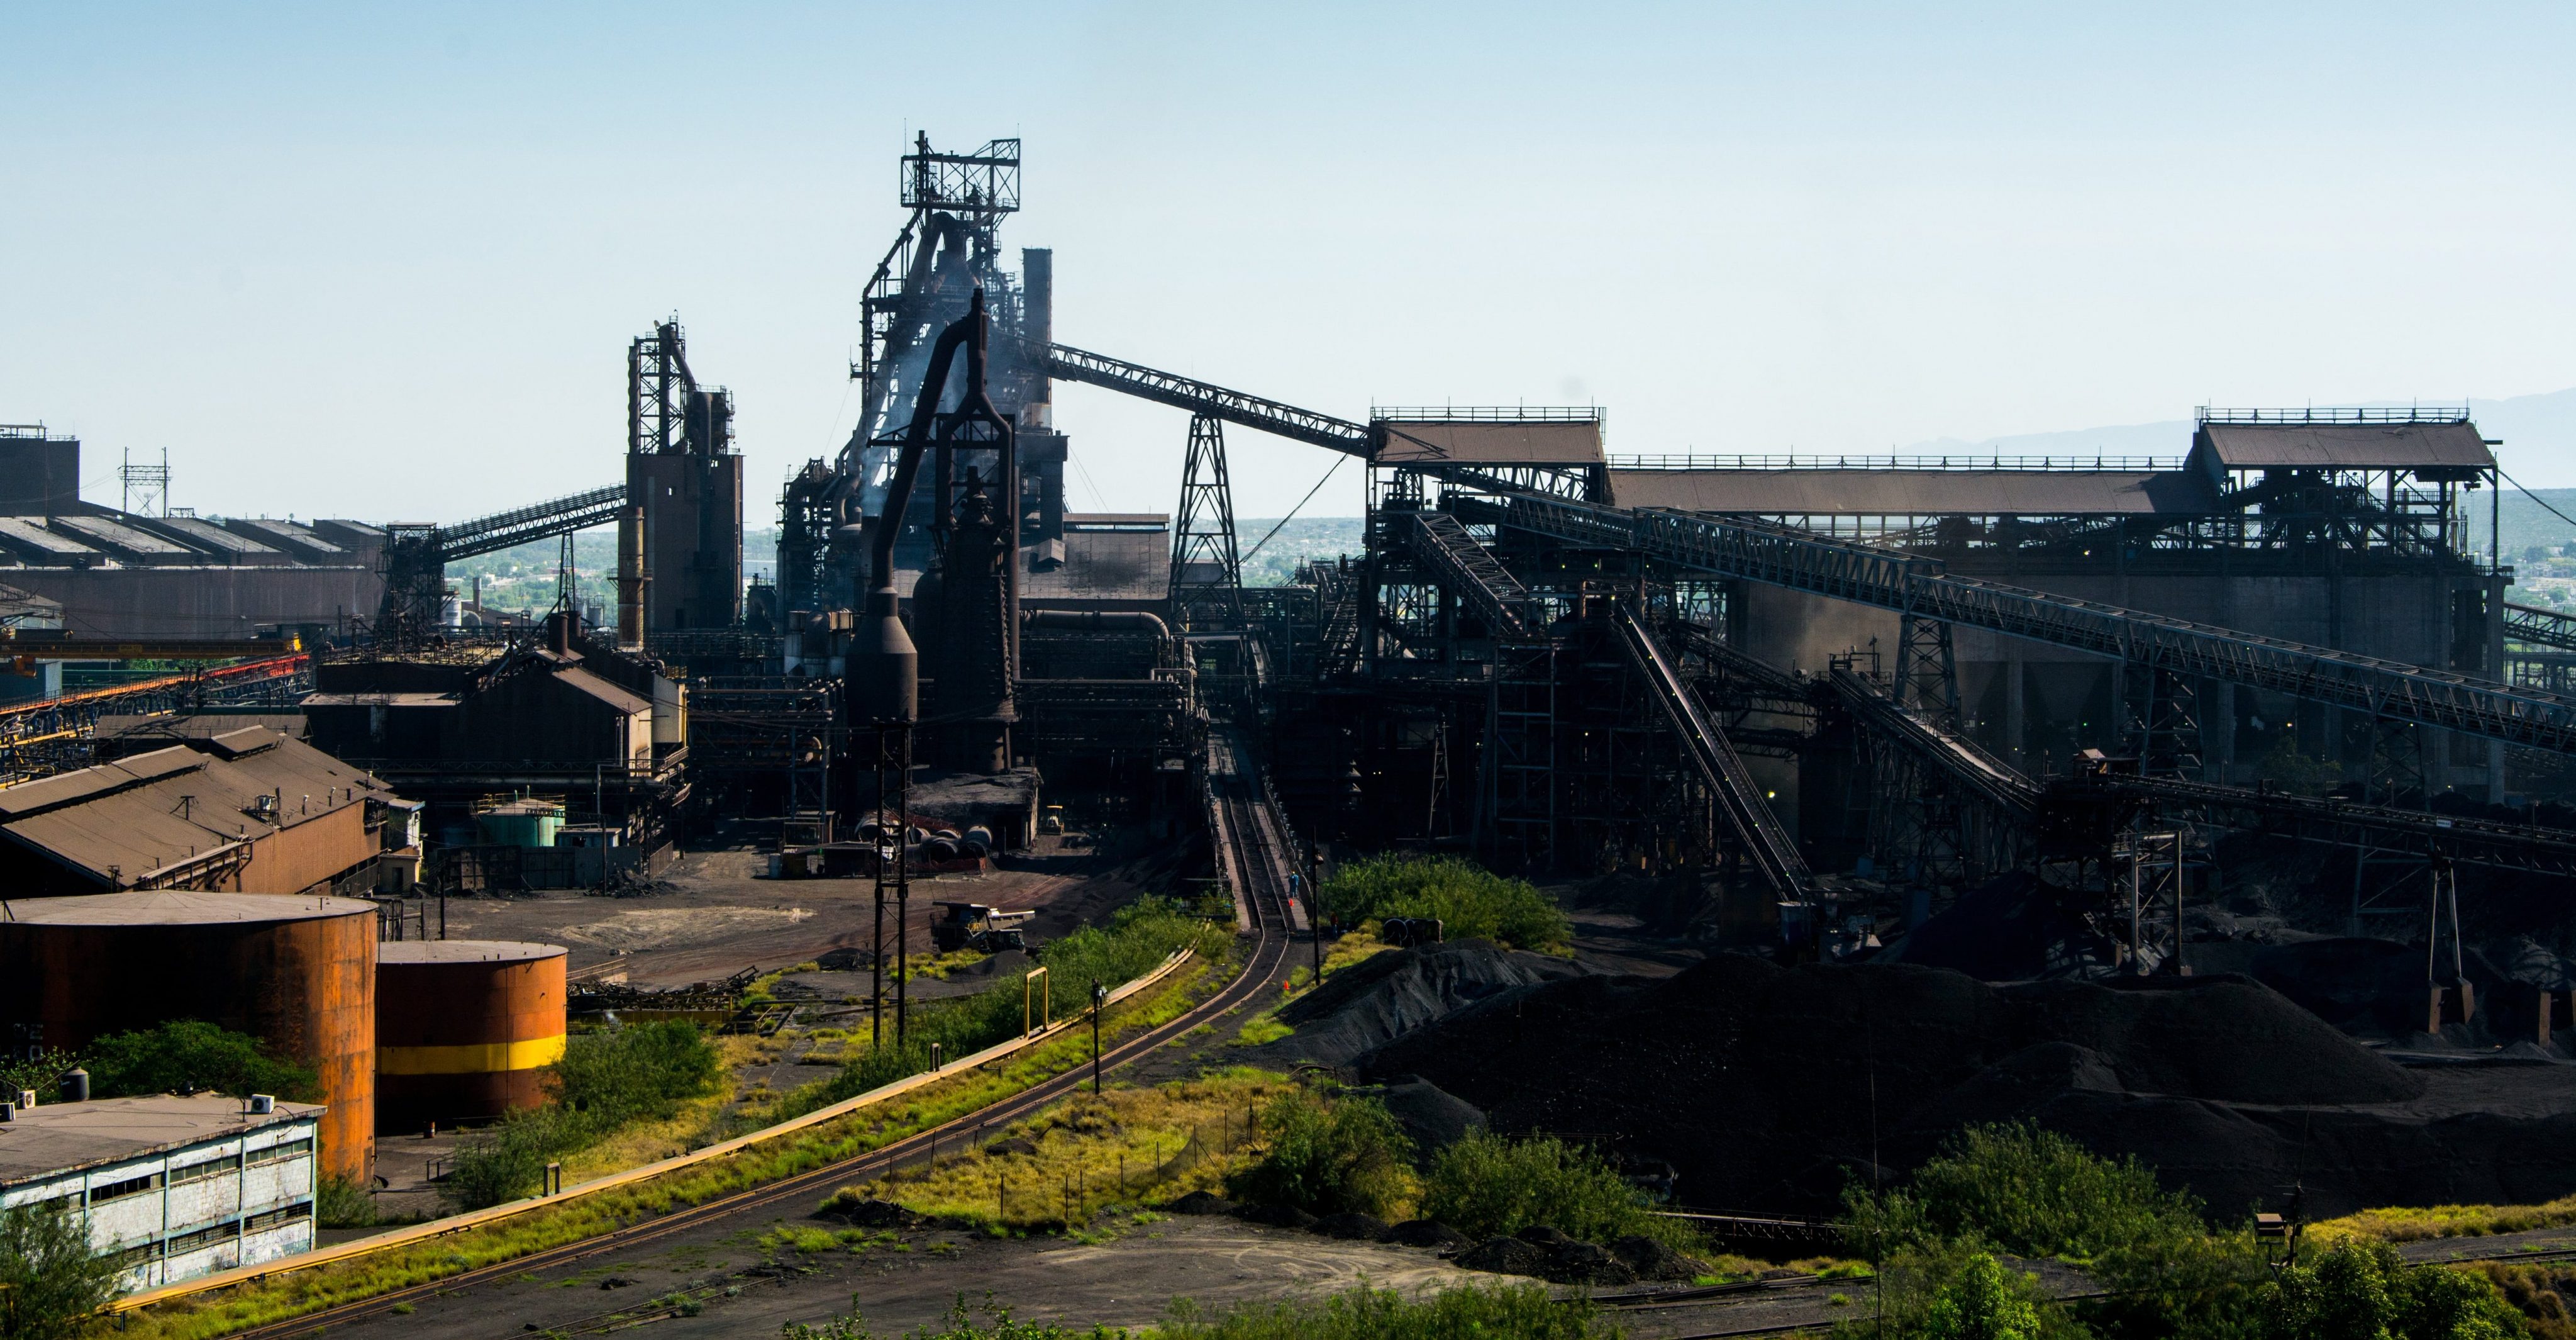 The reasons for the freezing of accounts at blast furnaces